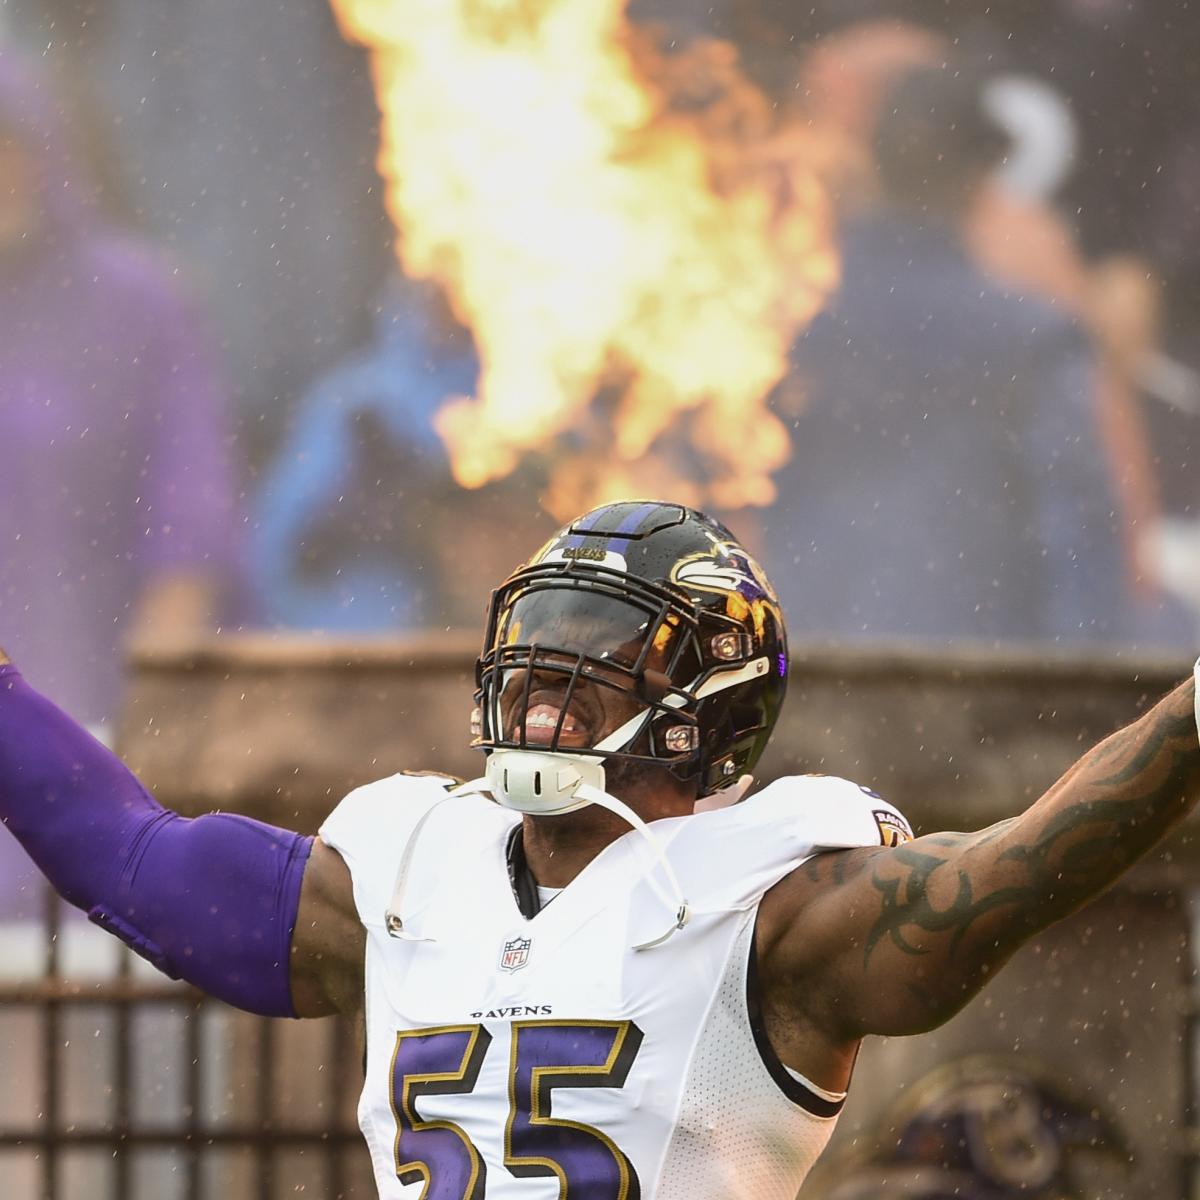 Reports: Suggs tells Ravens he's leaving team 